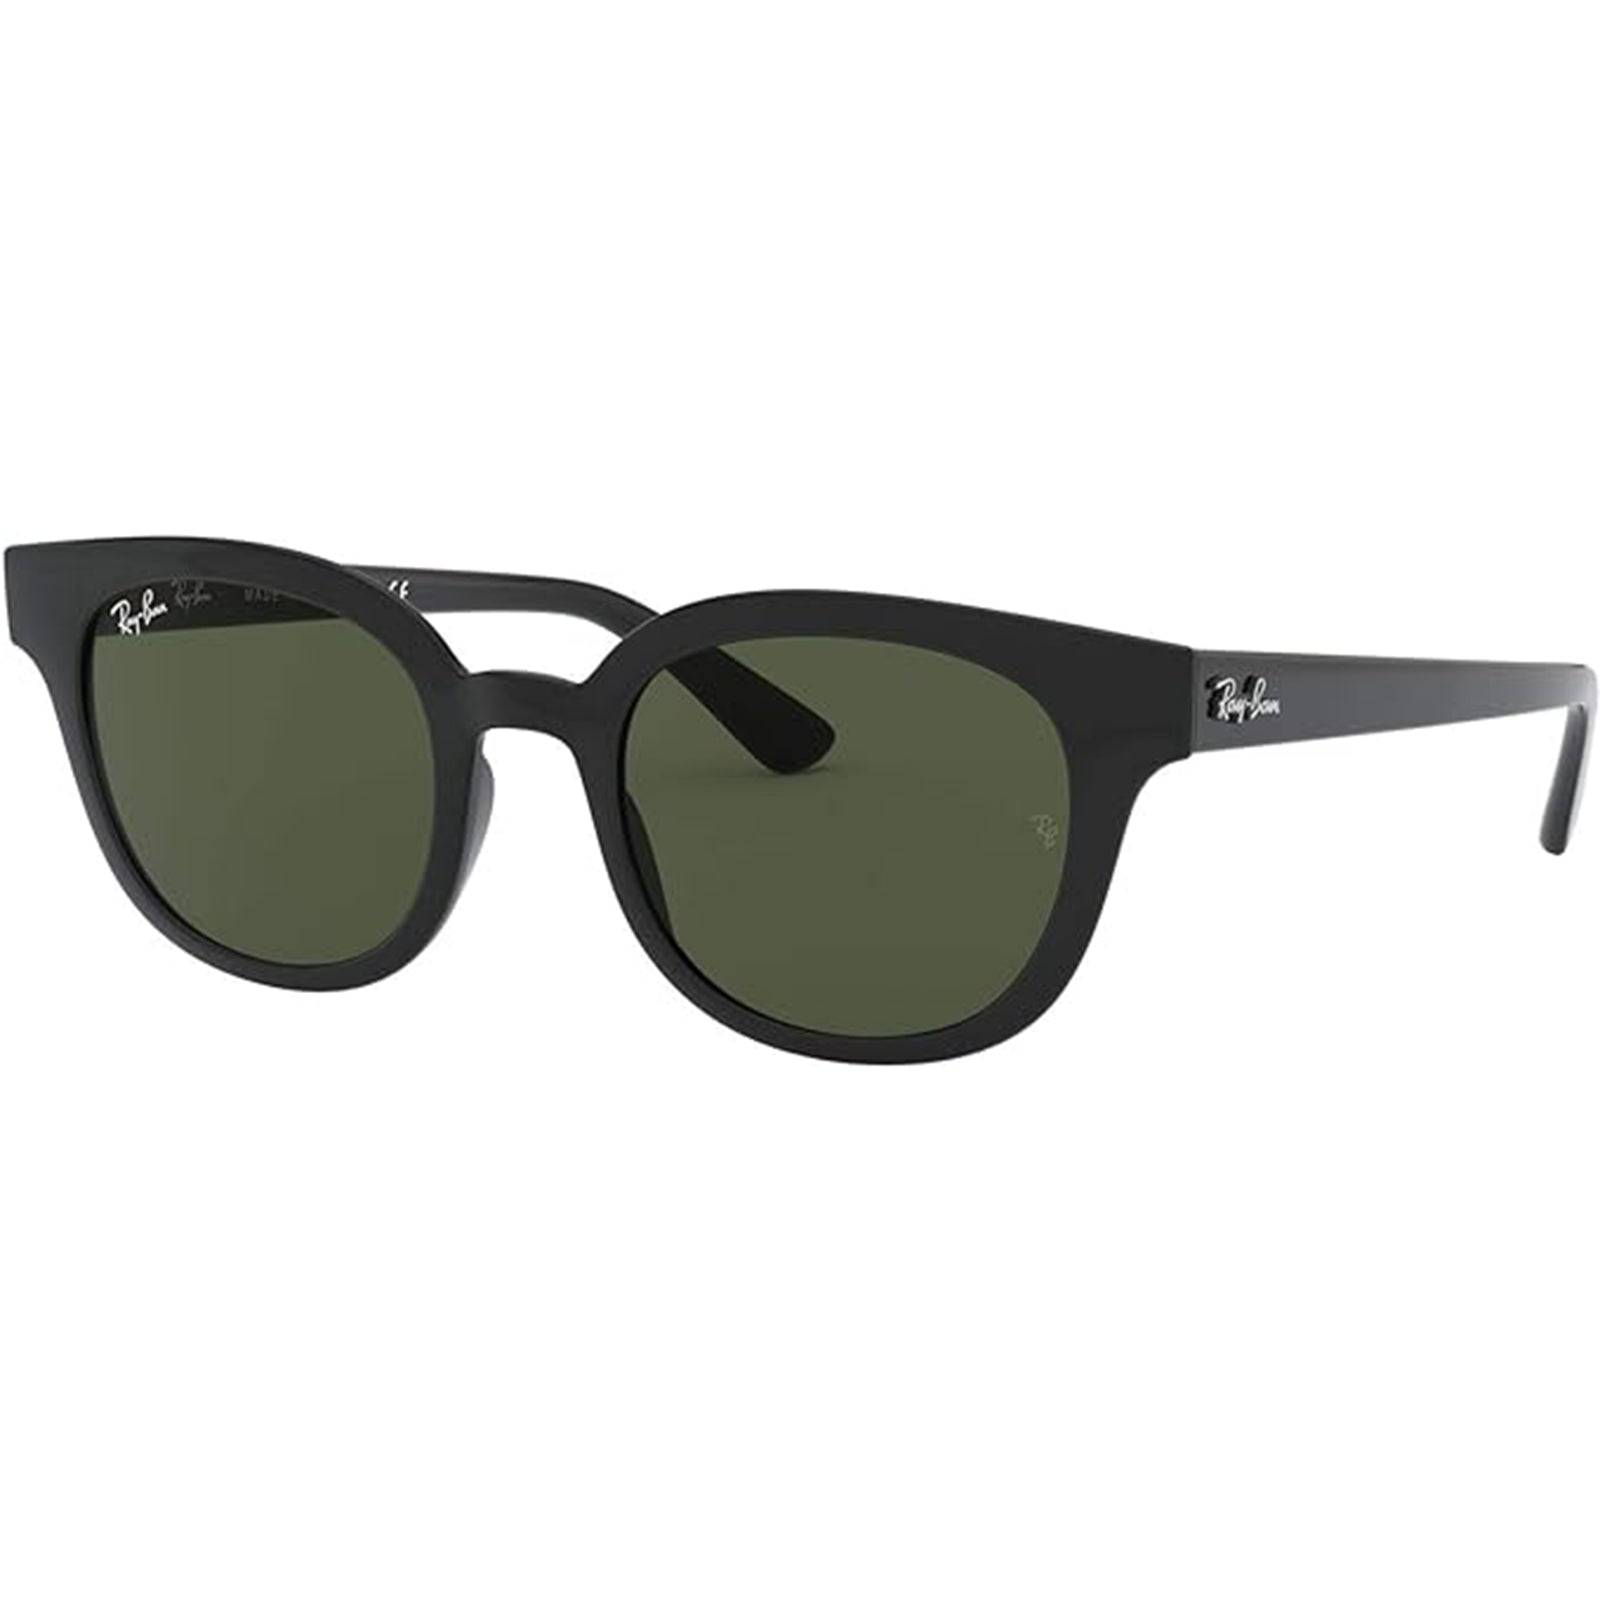 Ray-Ban RB4324 Adult Lifestyle Sunglasses-0RB4324F